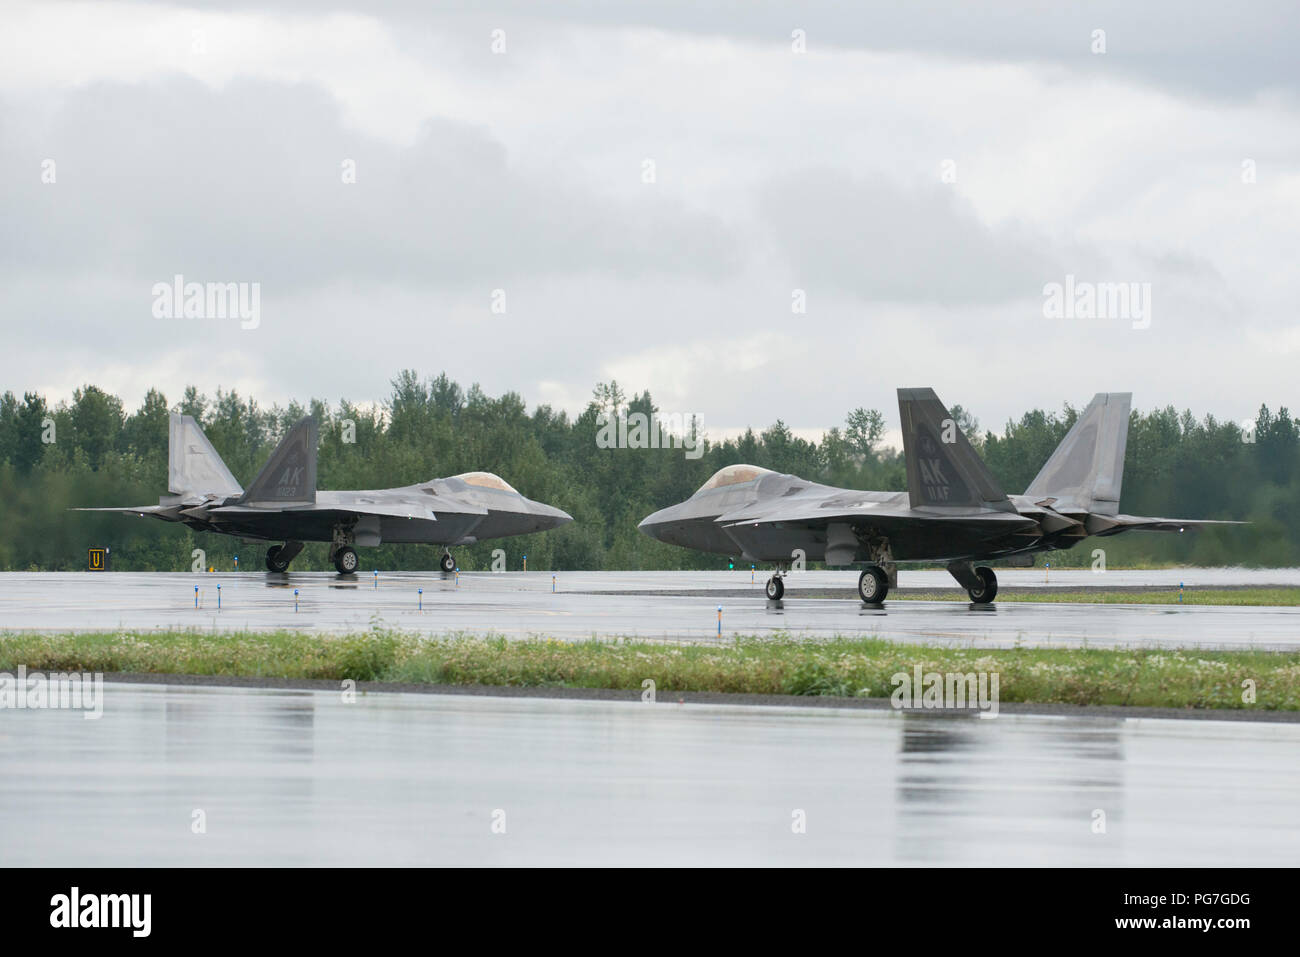 Air Force Col. Richard Koch, left, and Lt. Gen. Ken Wilsbach, taxi their F-22 Raptors while preparing to take off for Wilsbach’s final flight as commander of the Alaskan Command, Alaskan North American Aerospace Defense Region and Eleventh Air Force, at Joint Base Elmendorf-Richardson, Alaska, Aug. 20, 2018. Wilsbach is a command pilot with more than 5,000 flight hours, primarily in the F-15C, MC-12 and F-22, and has flown 71 combat missions in operations Northern Watch, Southern Watch and Enduring Freedom. Koch is the commander for the 3rd Operations Group. (U.S. Air Force photo by Alejandro  Stock Photo